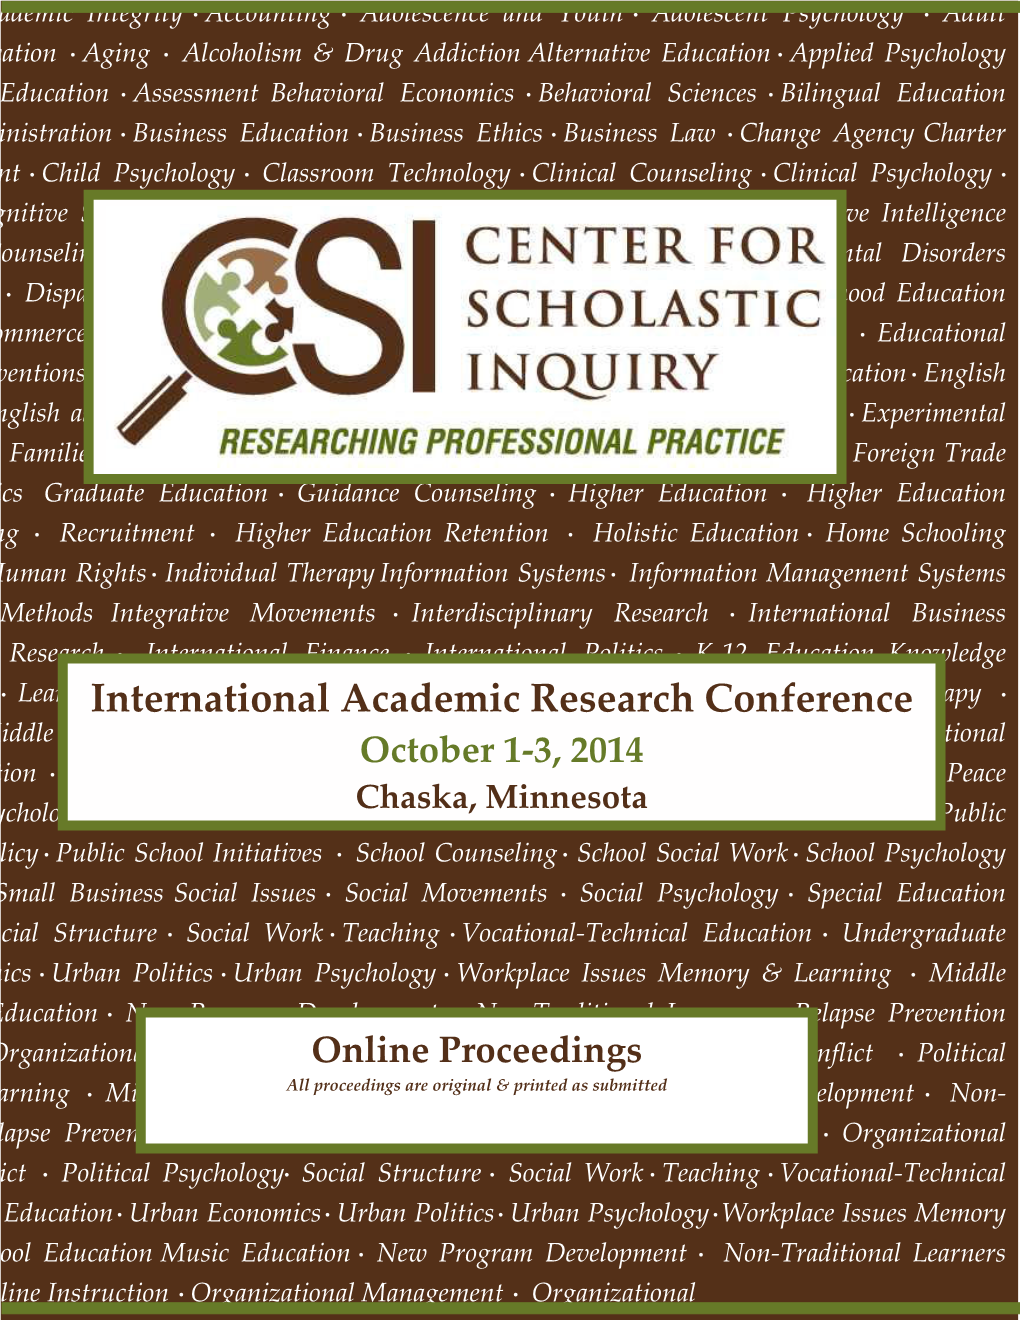 International Academic Research Conference in Chaska, Minnesota (October 1‐3, 2014)